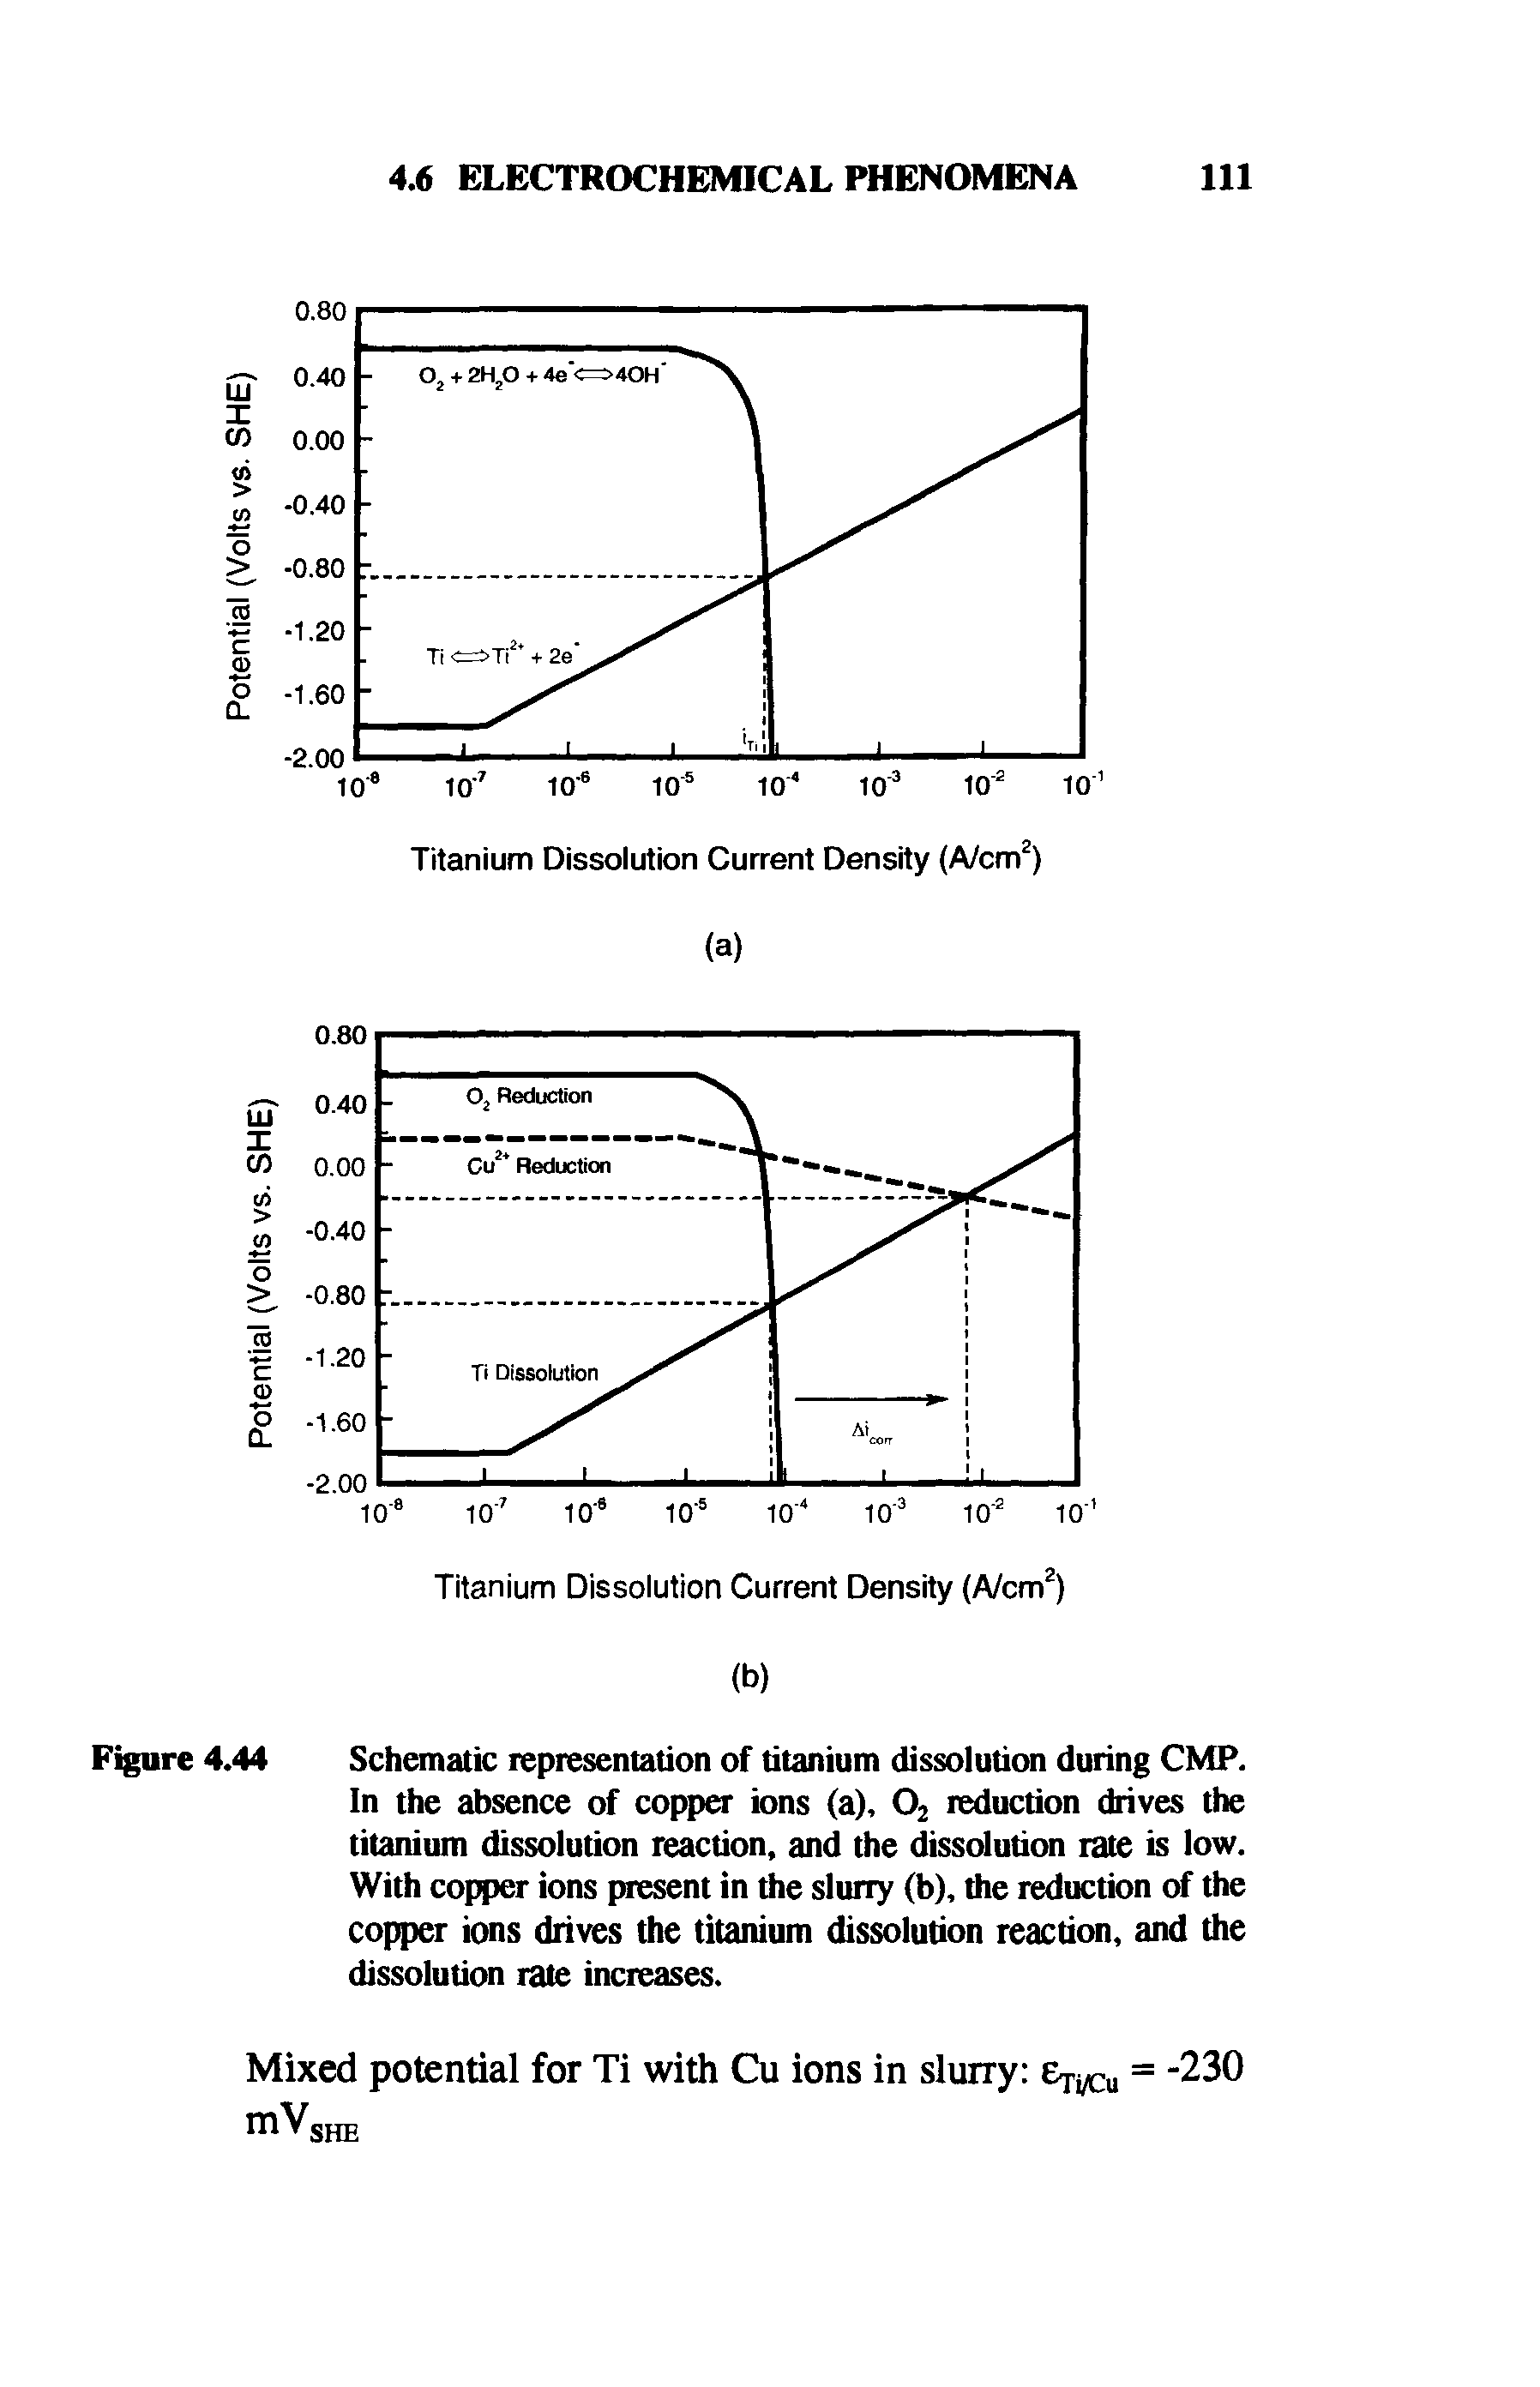 Schematic representation of titanium dissolution during CMP. In the absence of copper ions (a), O2 reduction drives the titanium dissolution reaction, and the dissolution rate is low. With coRter ions present in the slurry (b), the reduction of the cop r ions drives the titanium dissolution reaction, and the dissolution rate increases.